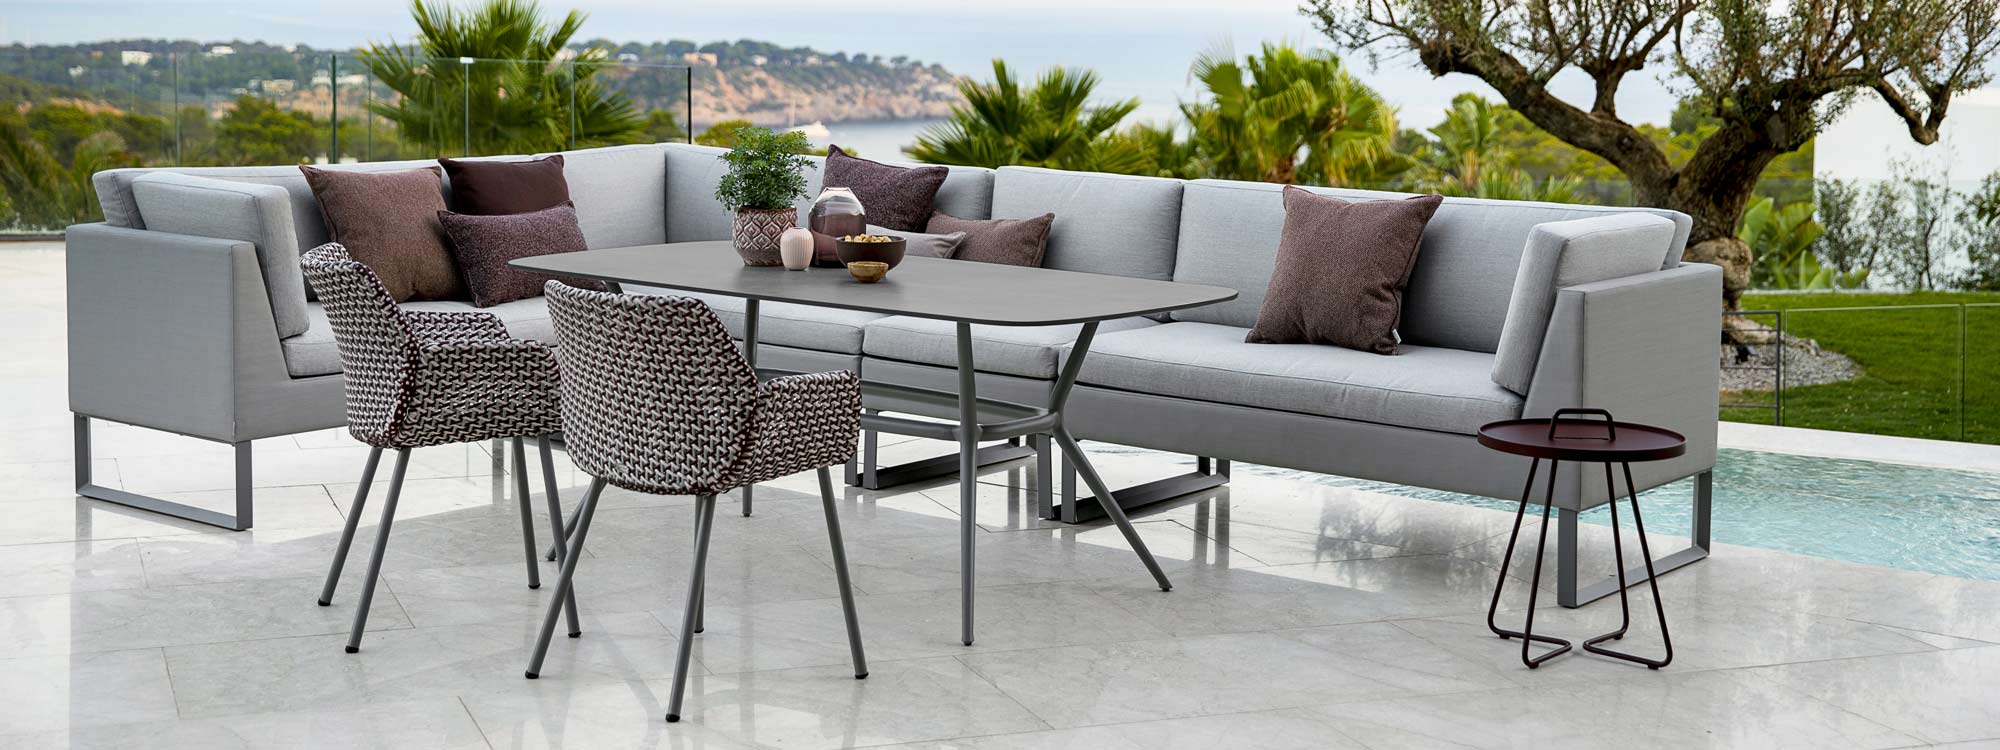 Image of Flex corner dining sofa and Joy table by Cane-line on Mediterranean terrace with sea in background